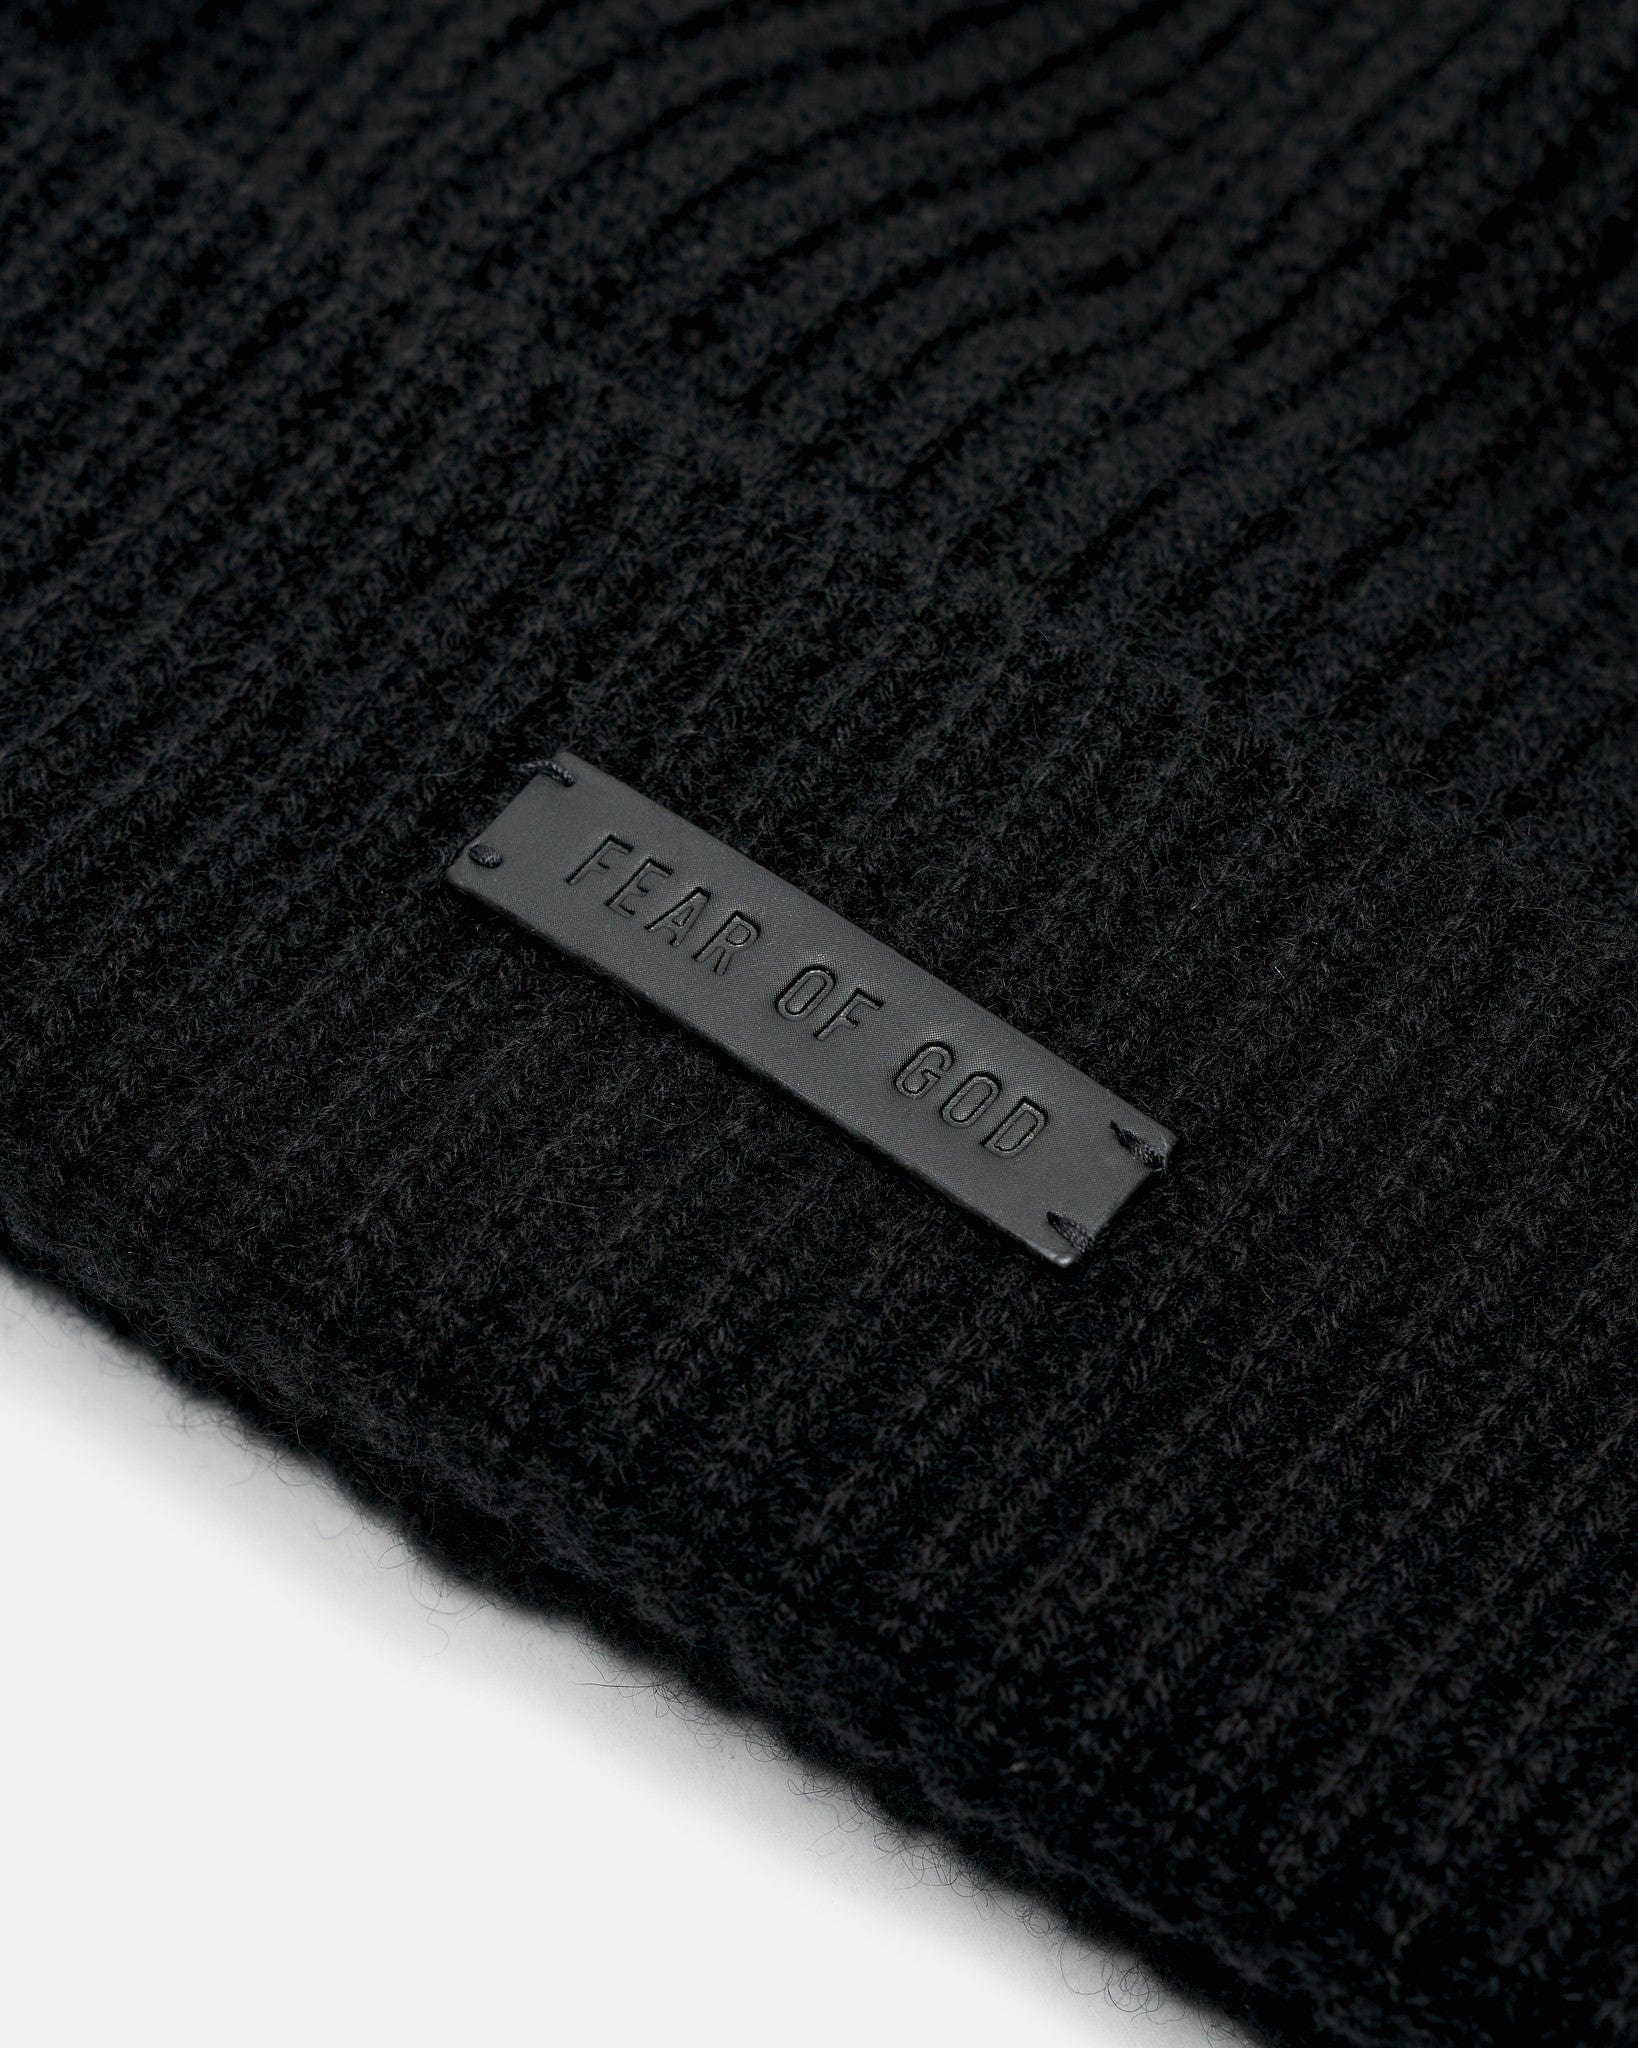 Fear of God Men's Hats OS 8th Collection Beanie in Black